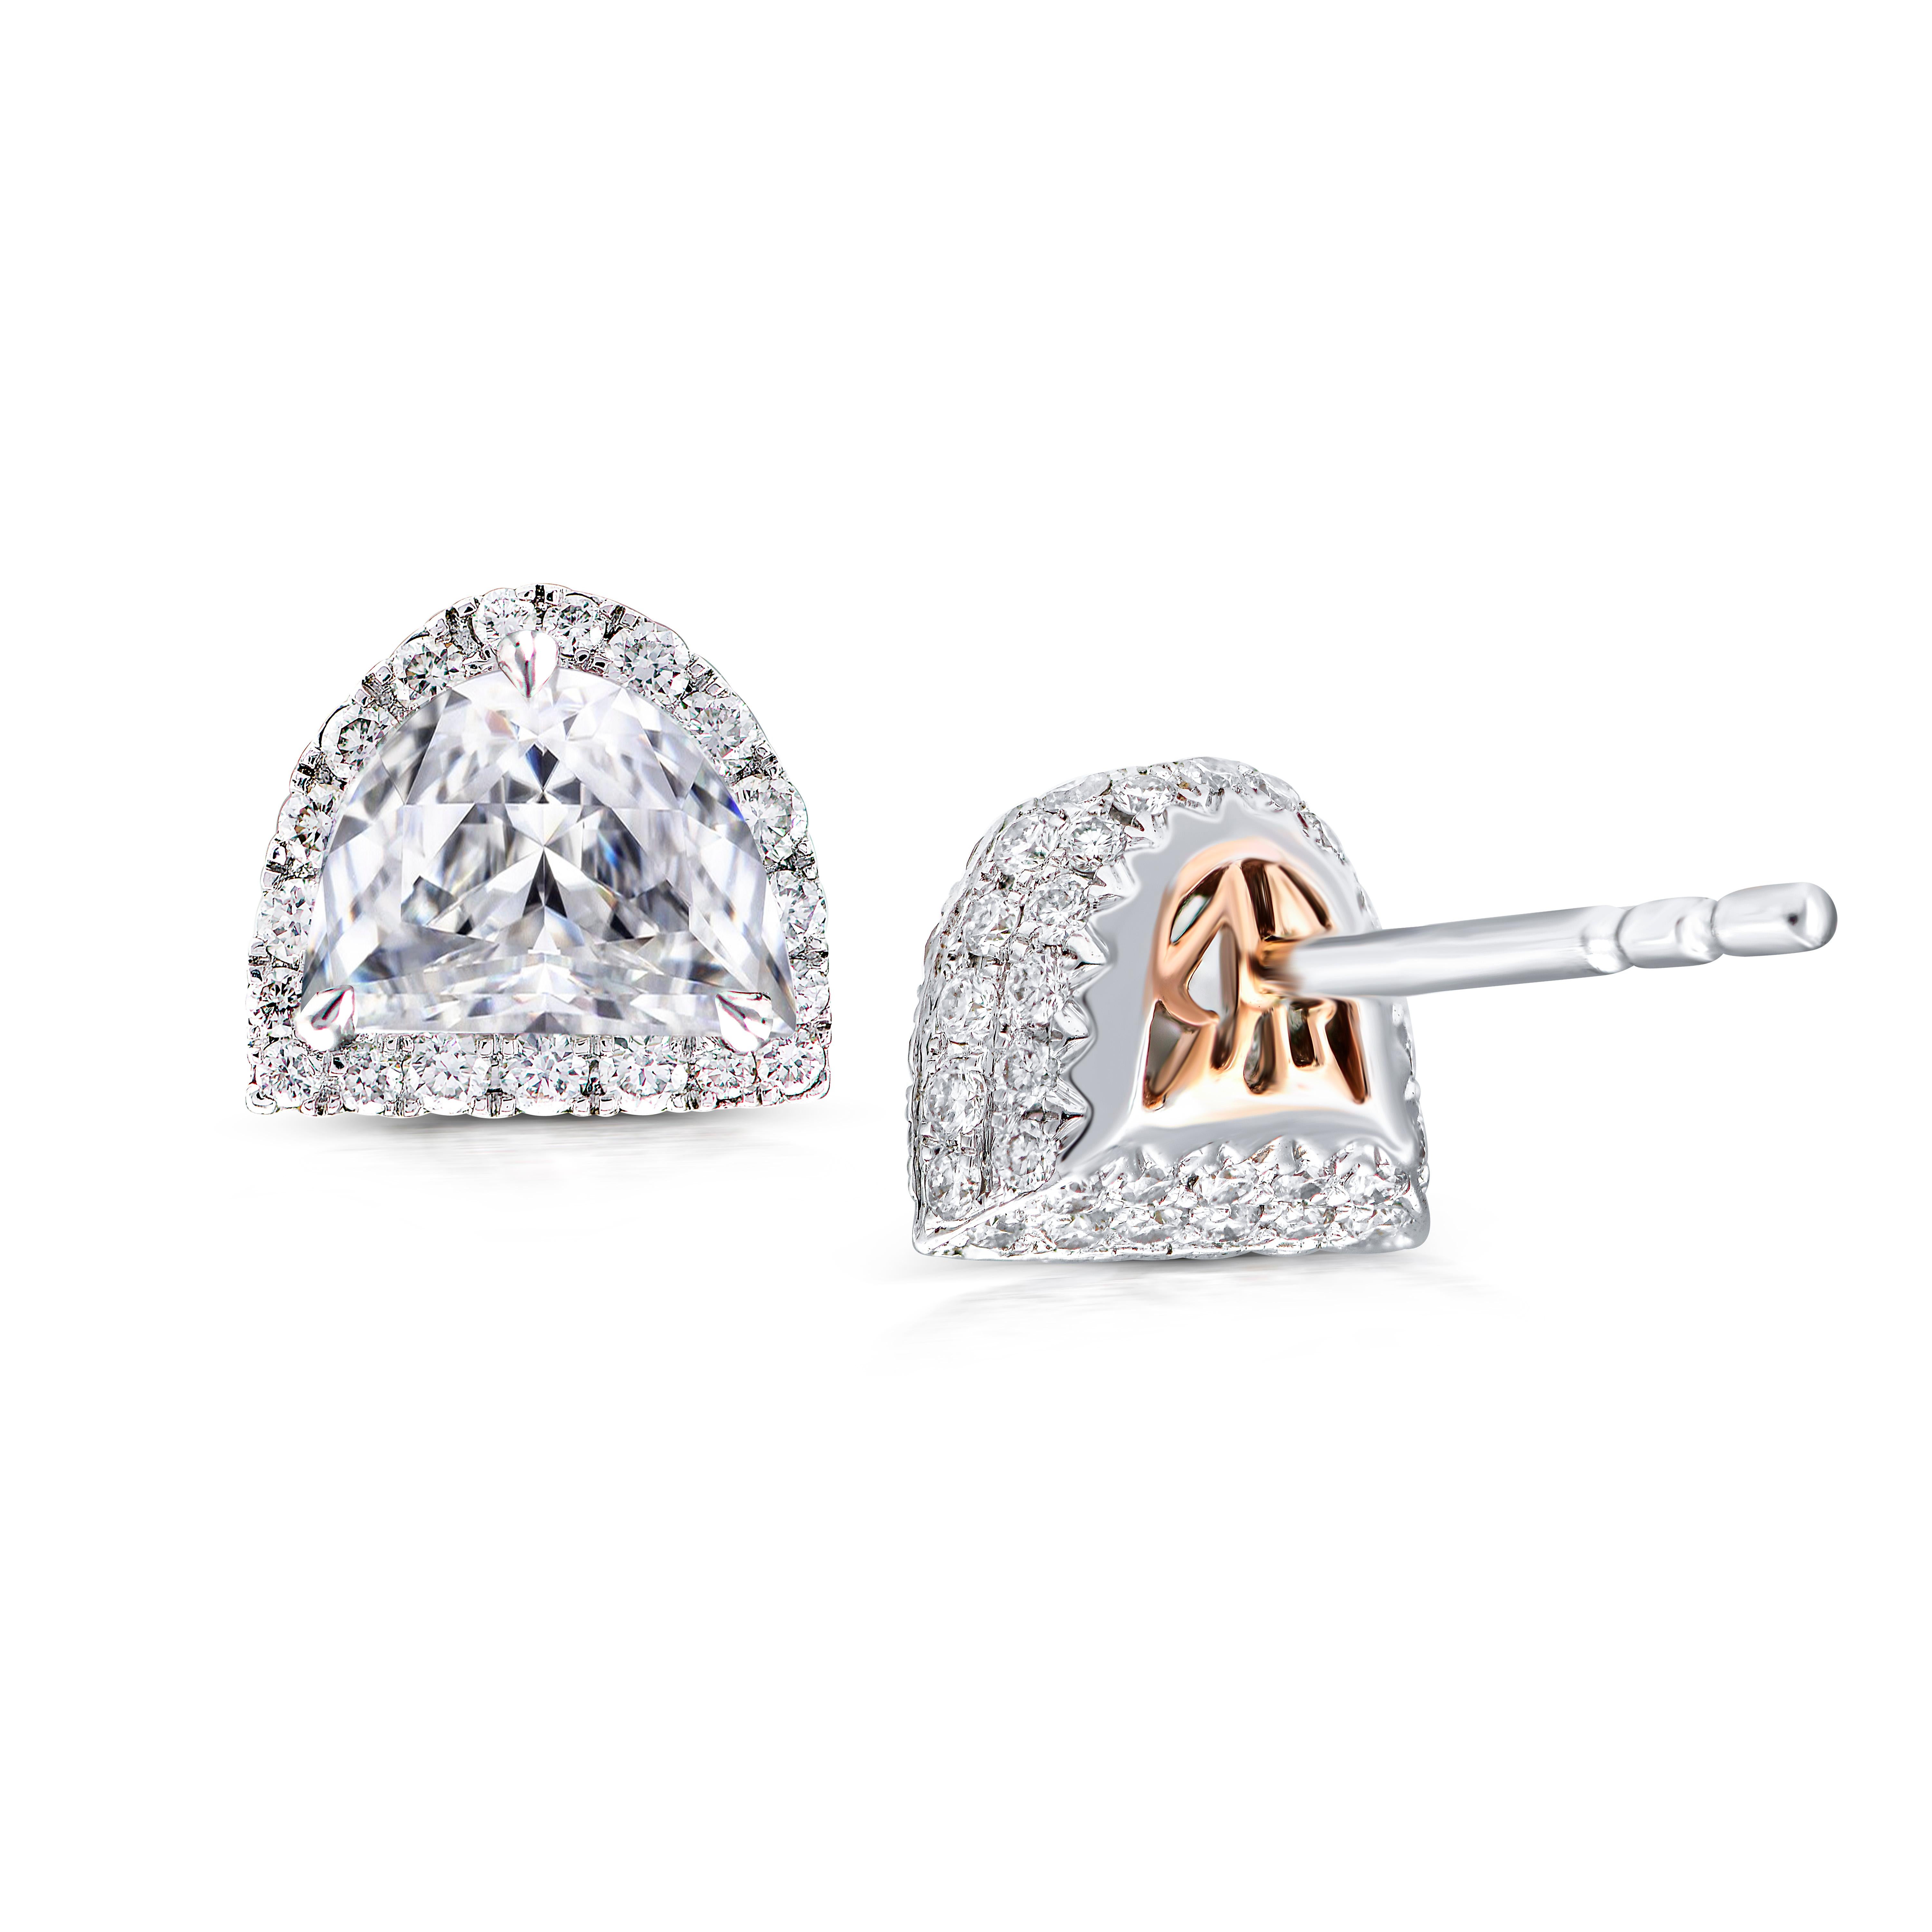 These exquisite Rarever earrings feature a stunning combination of old cut half moon diamonds and white gold. Each earring showcases a 0.58ct old cut half moon cut diamond with F color and VS clarity, delicately surrounded by a halo of over a